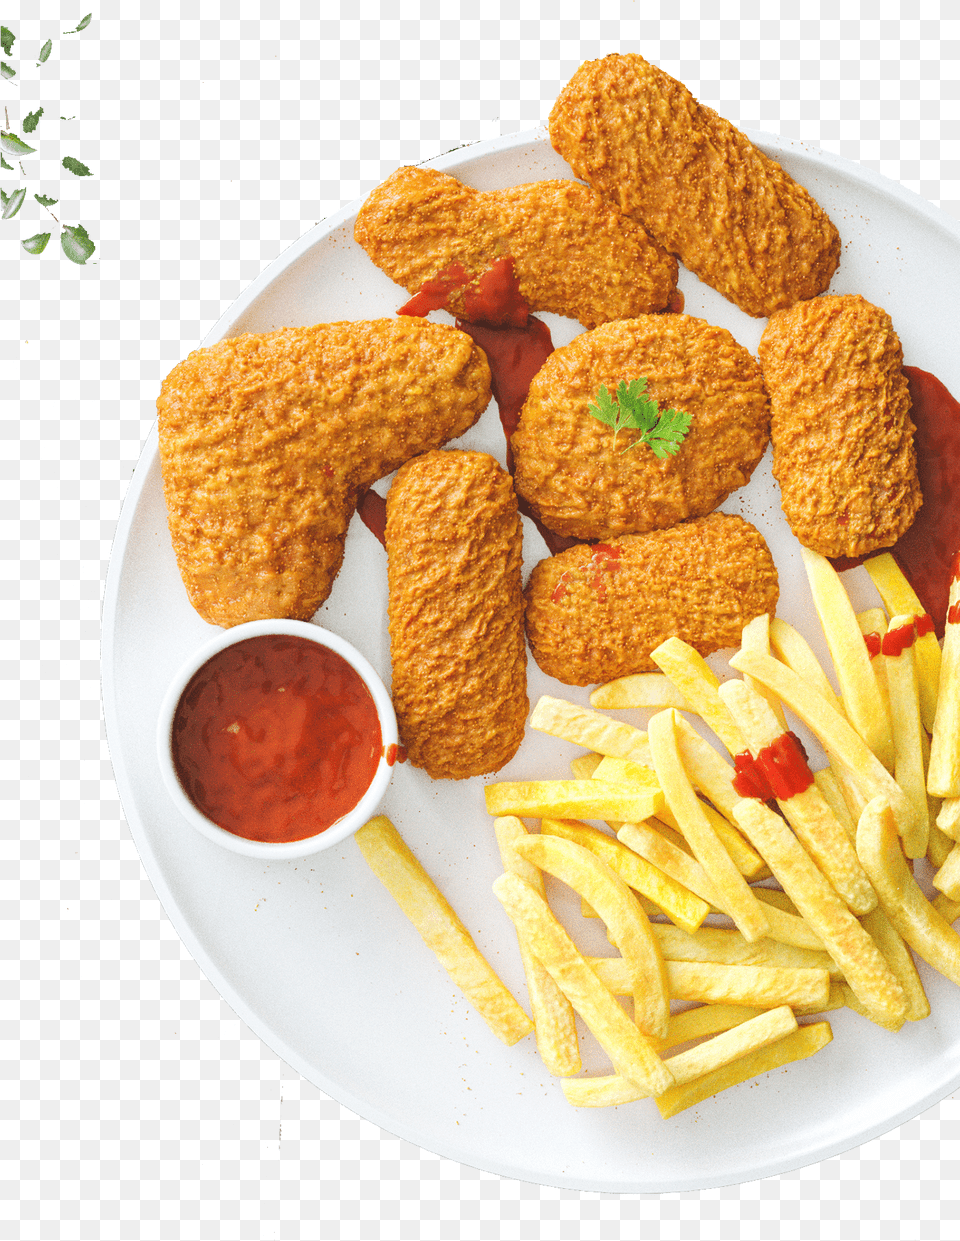 Clip Art Nugget Hamburger Fried Ketchup French Fries And Nuggets, Food, Bread, Fried Chicken, Plate Free Png